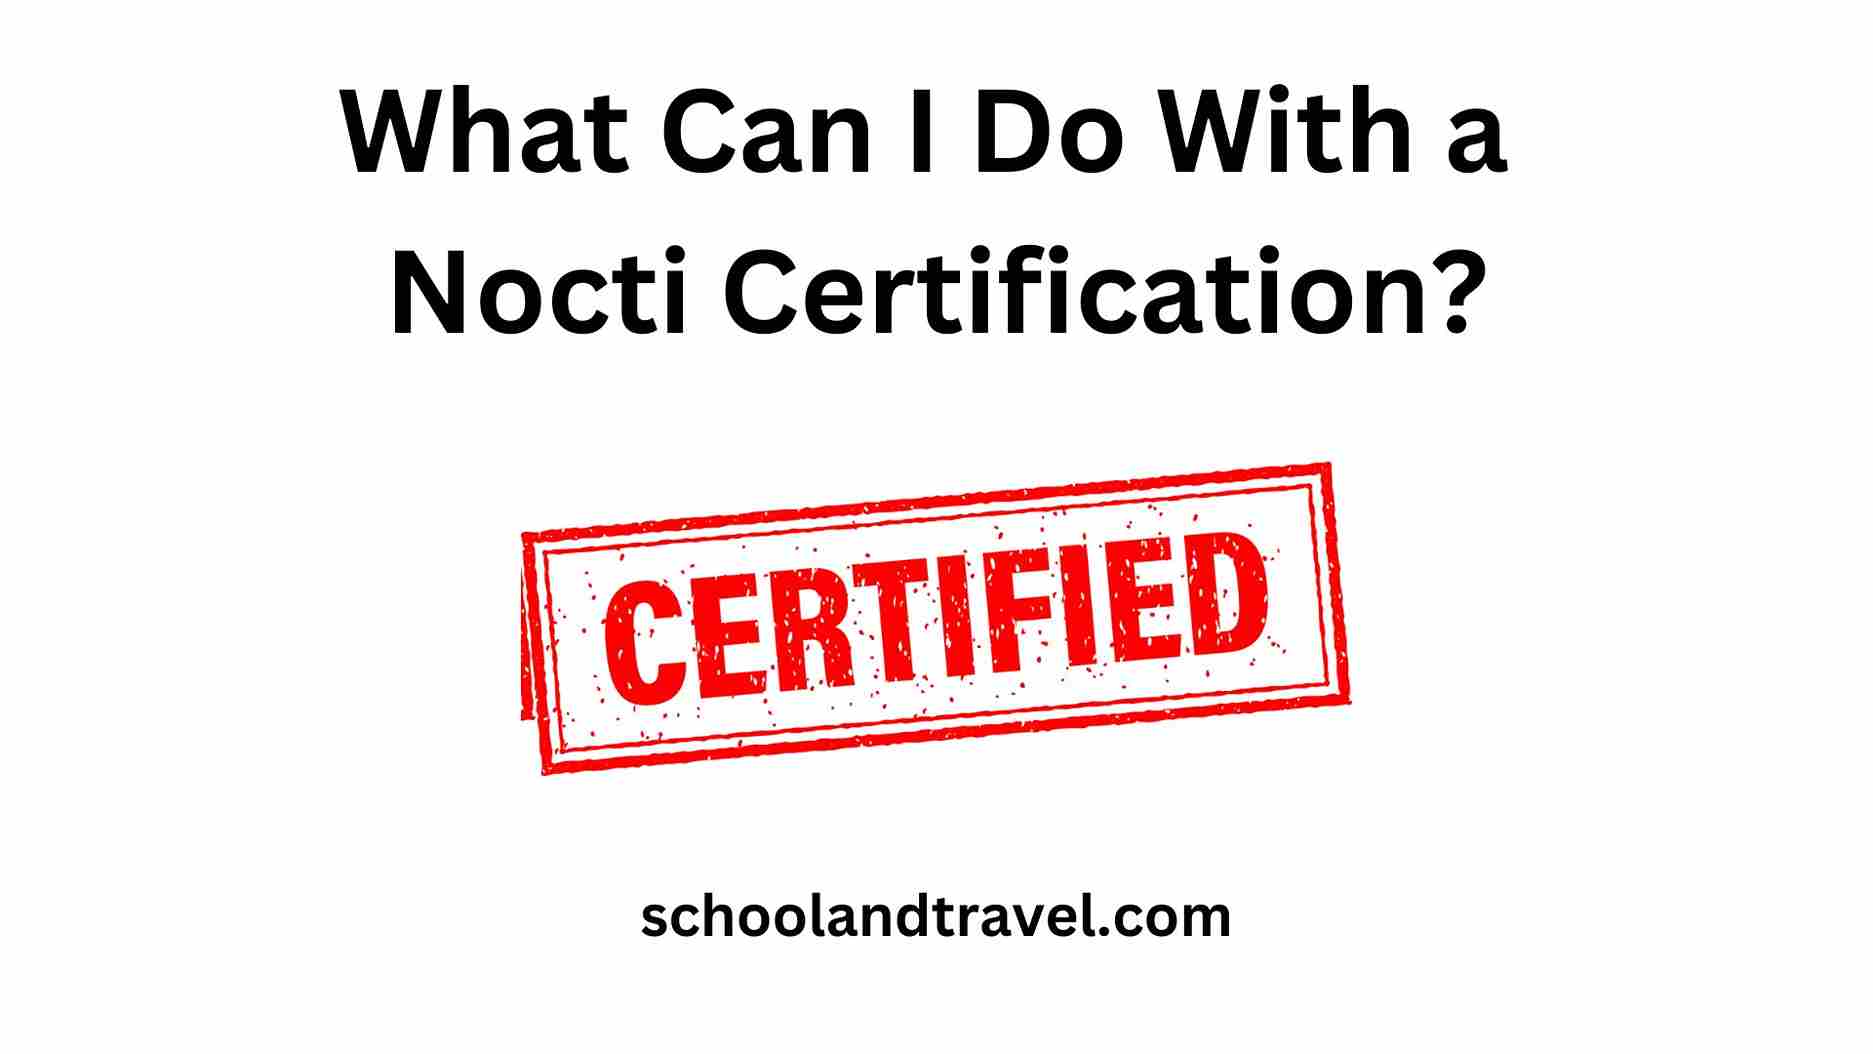 What Can I Do With a Nocti Certification?